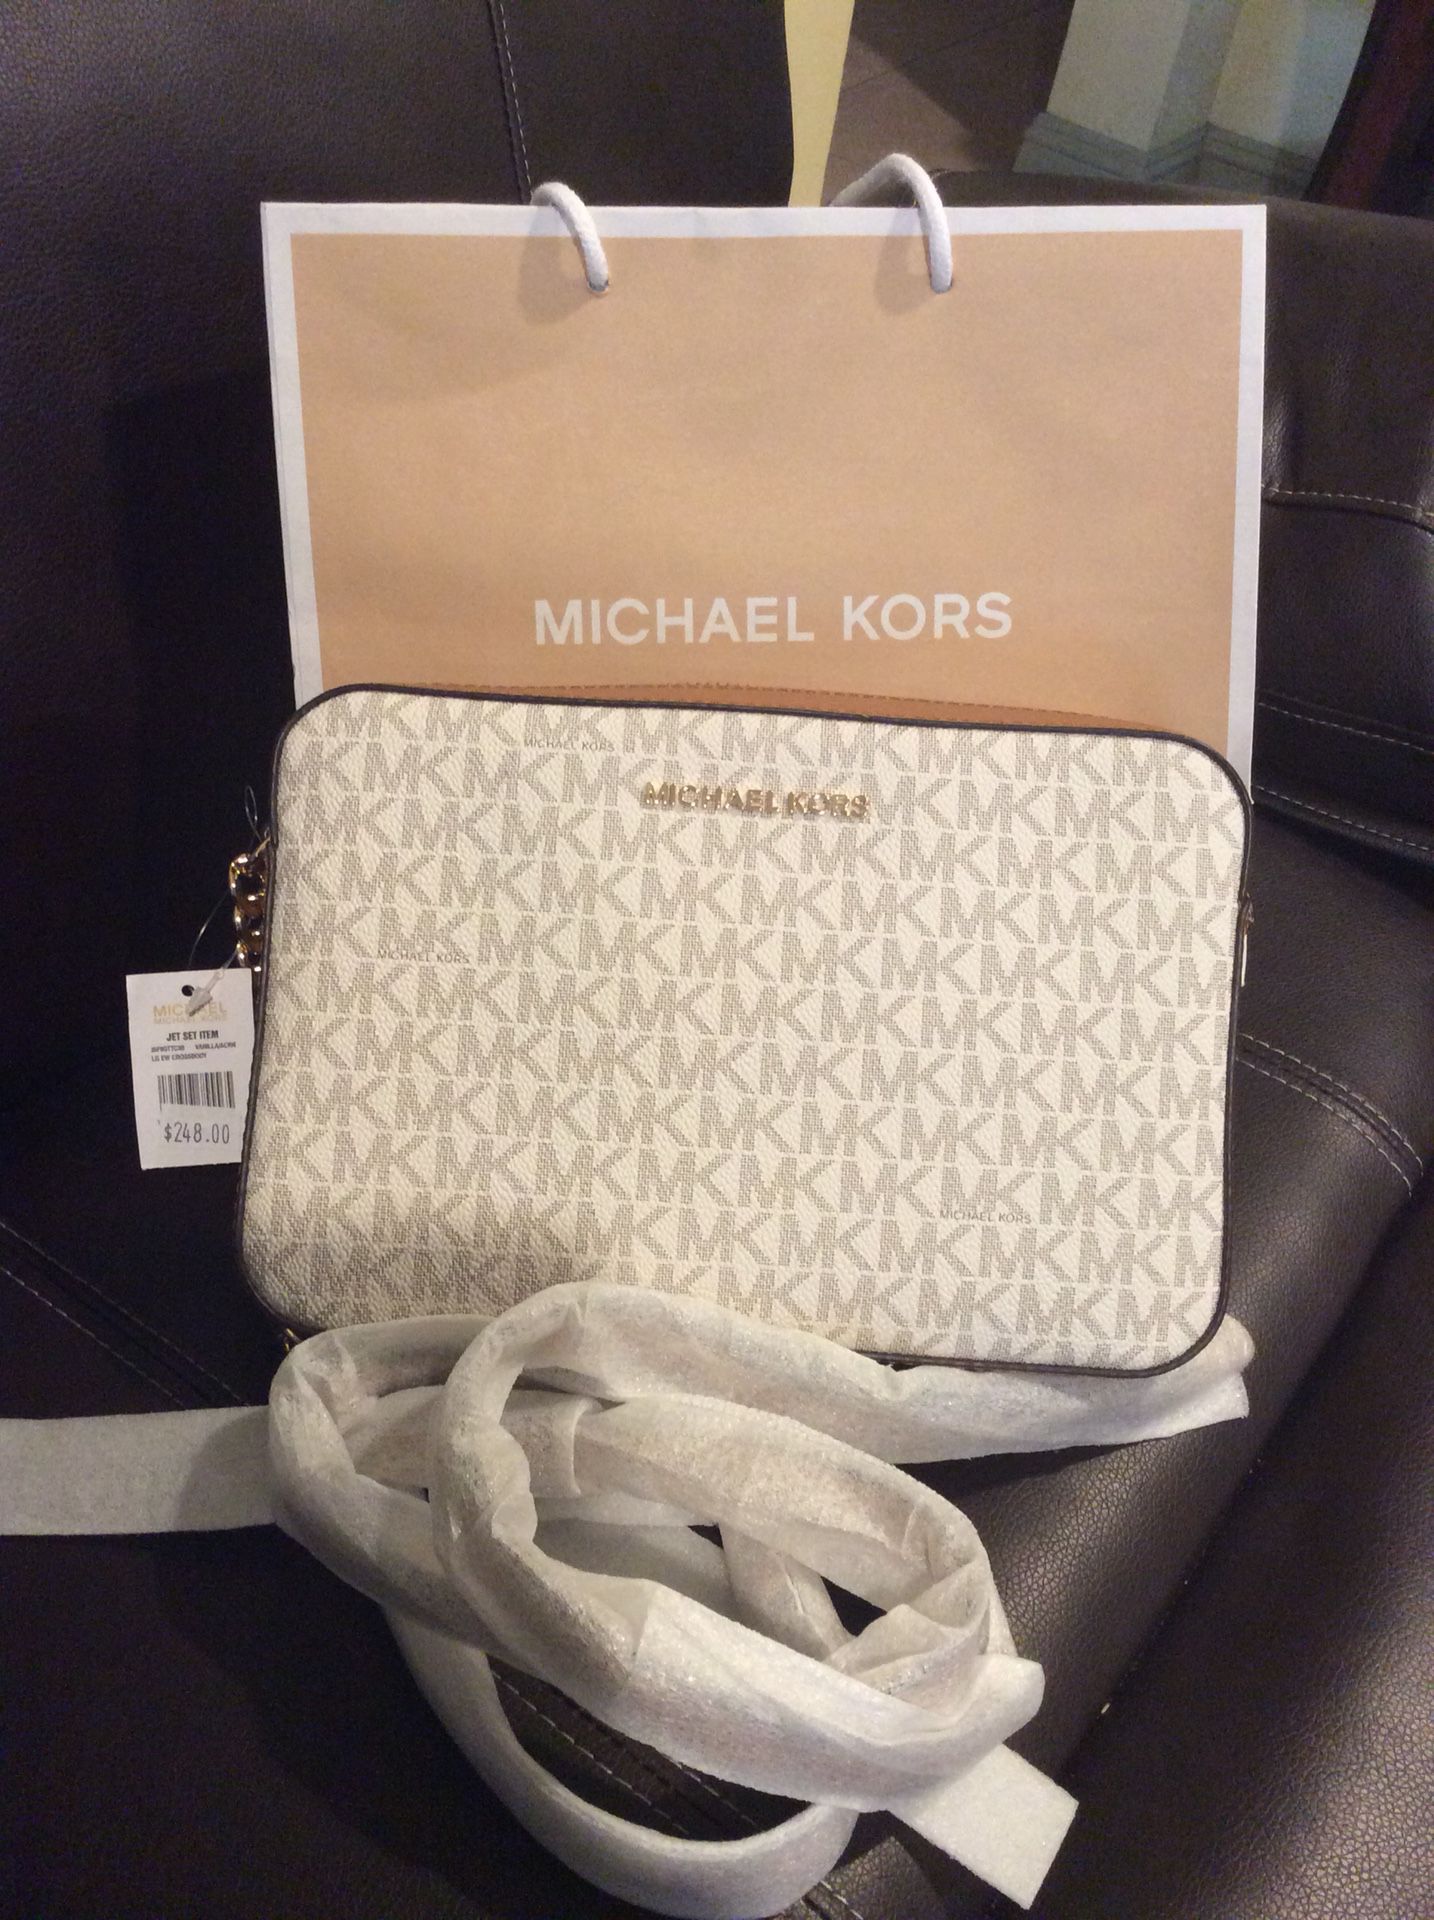 NWT Michael Kors Jet Set Travel Small Coin Pouch With ID Slot (Leather) in  Grapefruit for Sale in Rosemead, CA - OfferUp